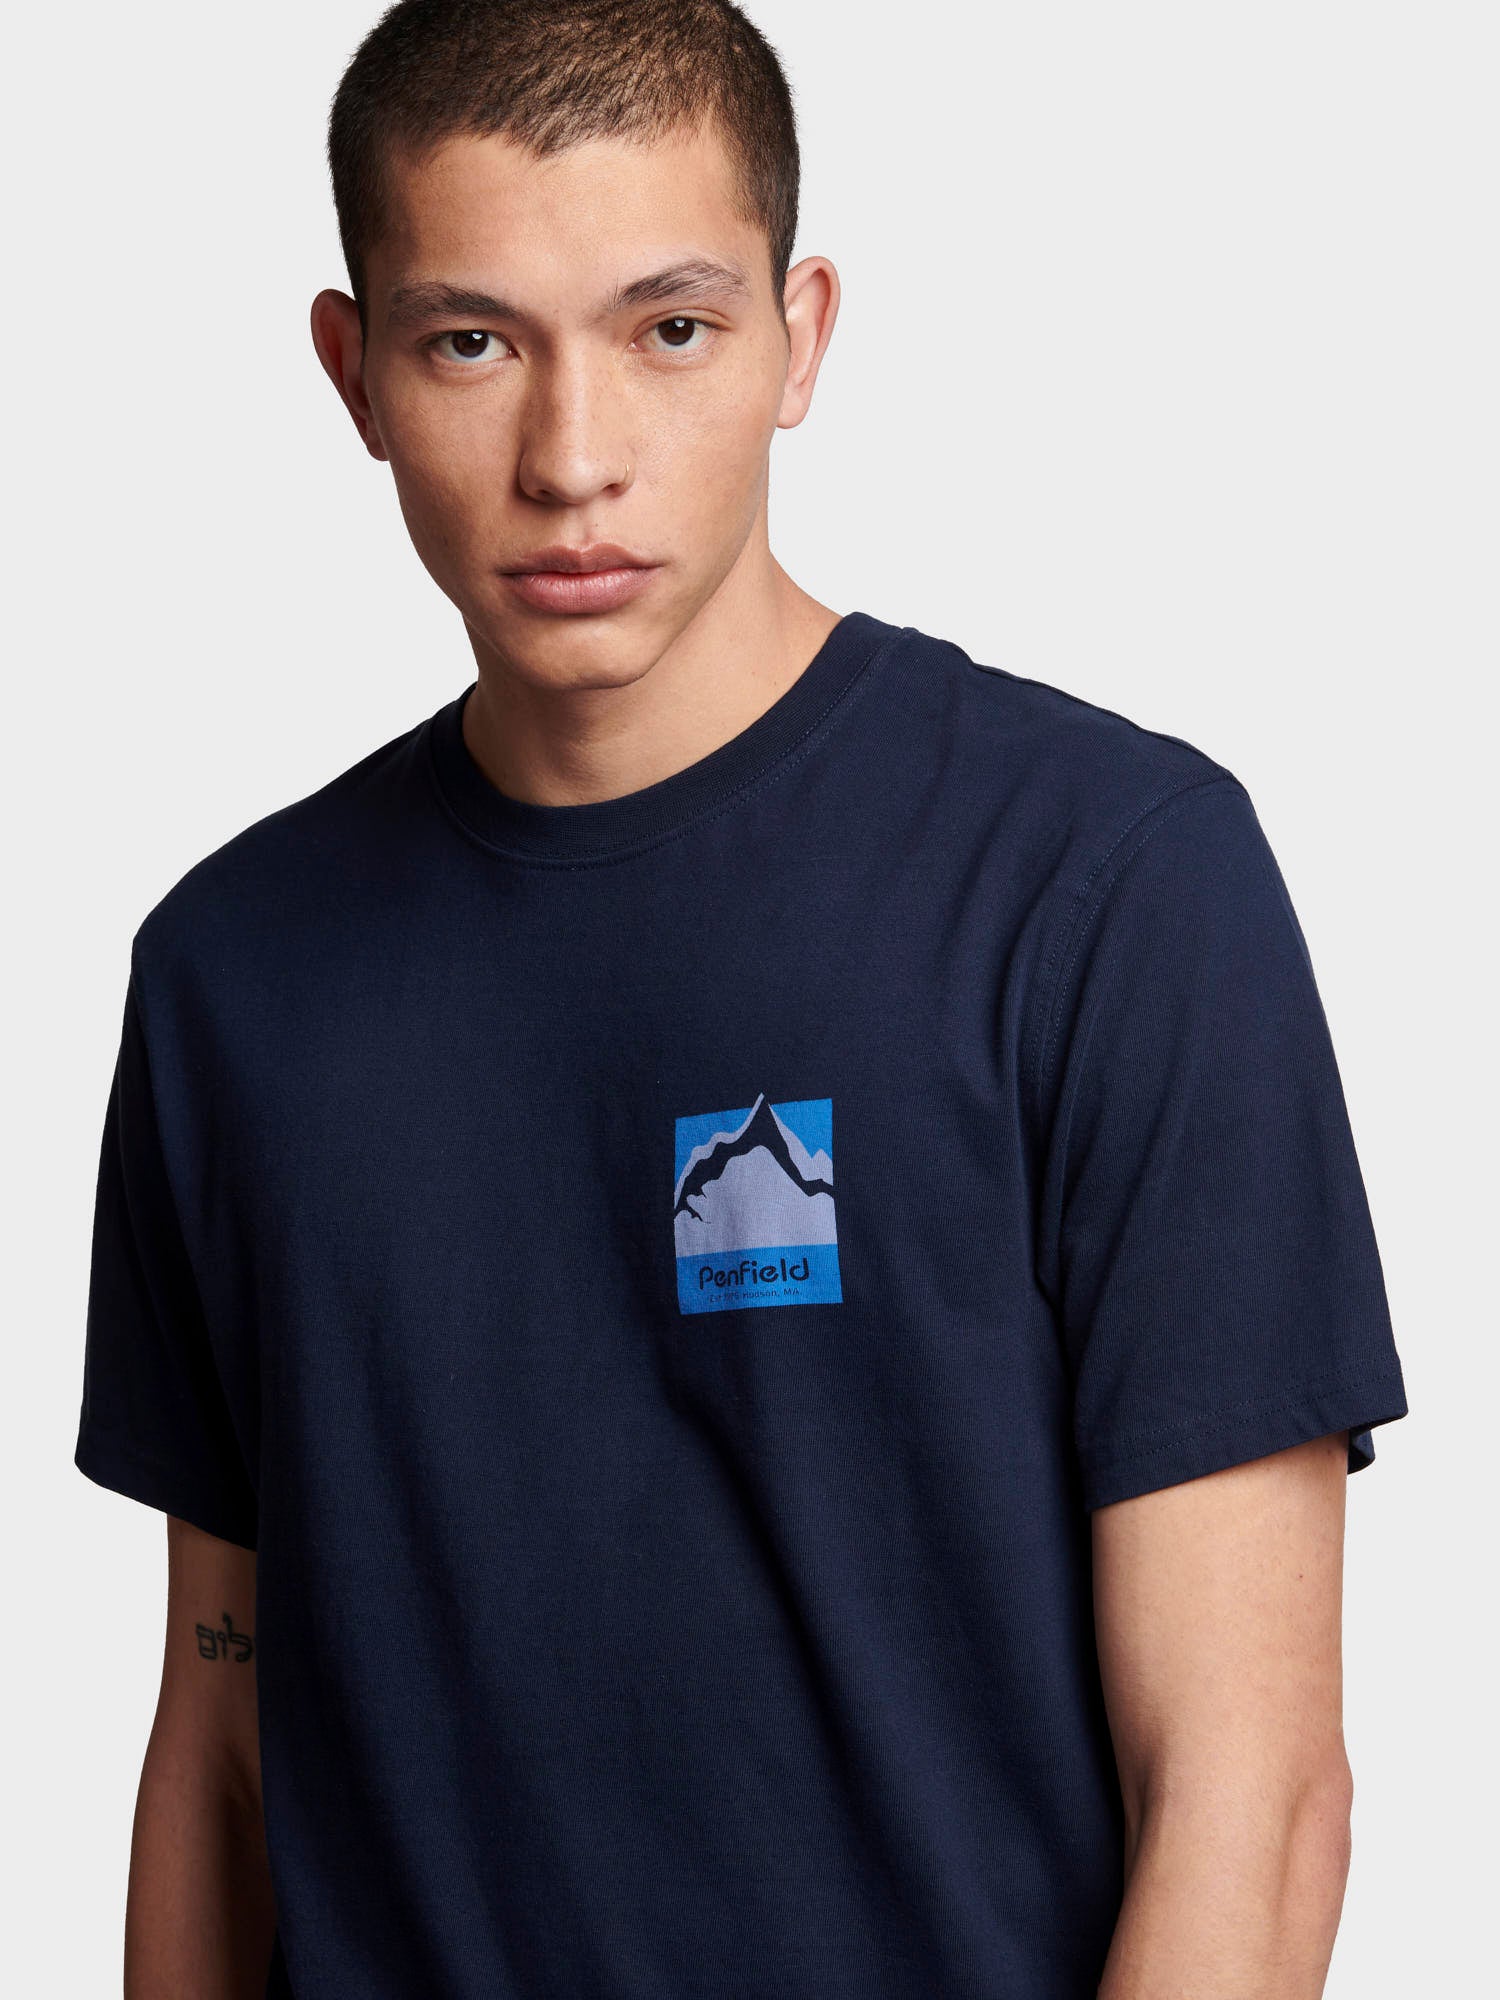 Relaxed Fit Mountain Scene Back Graphic T-Shirt in Navy Blue